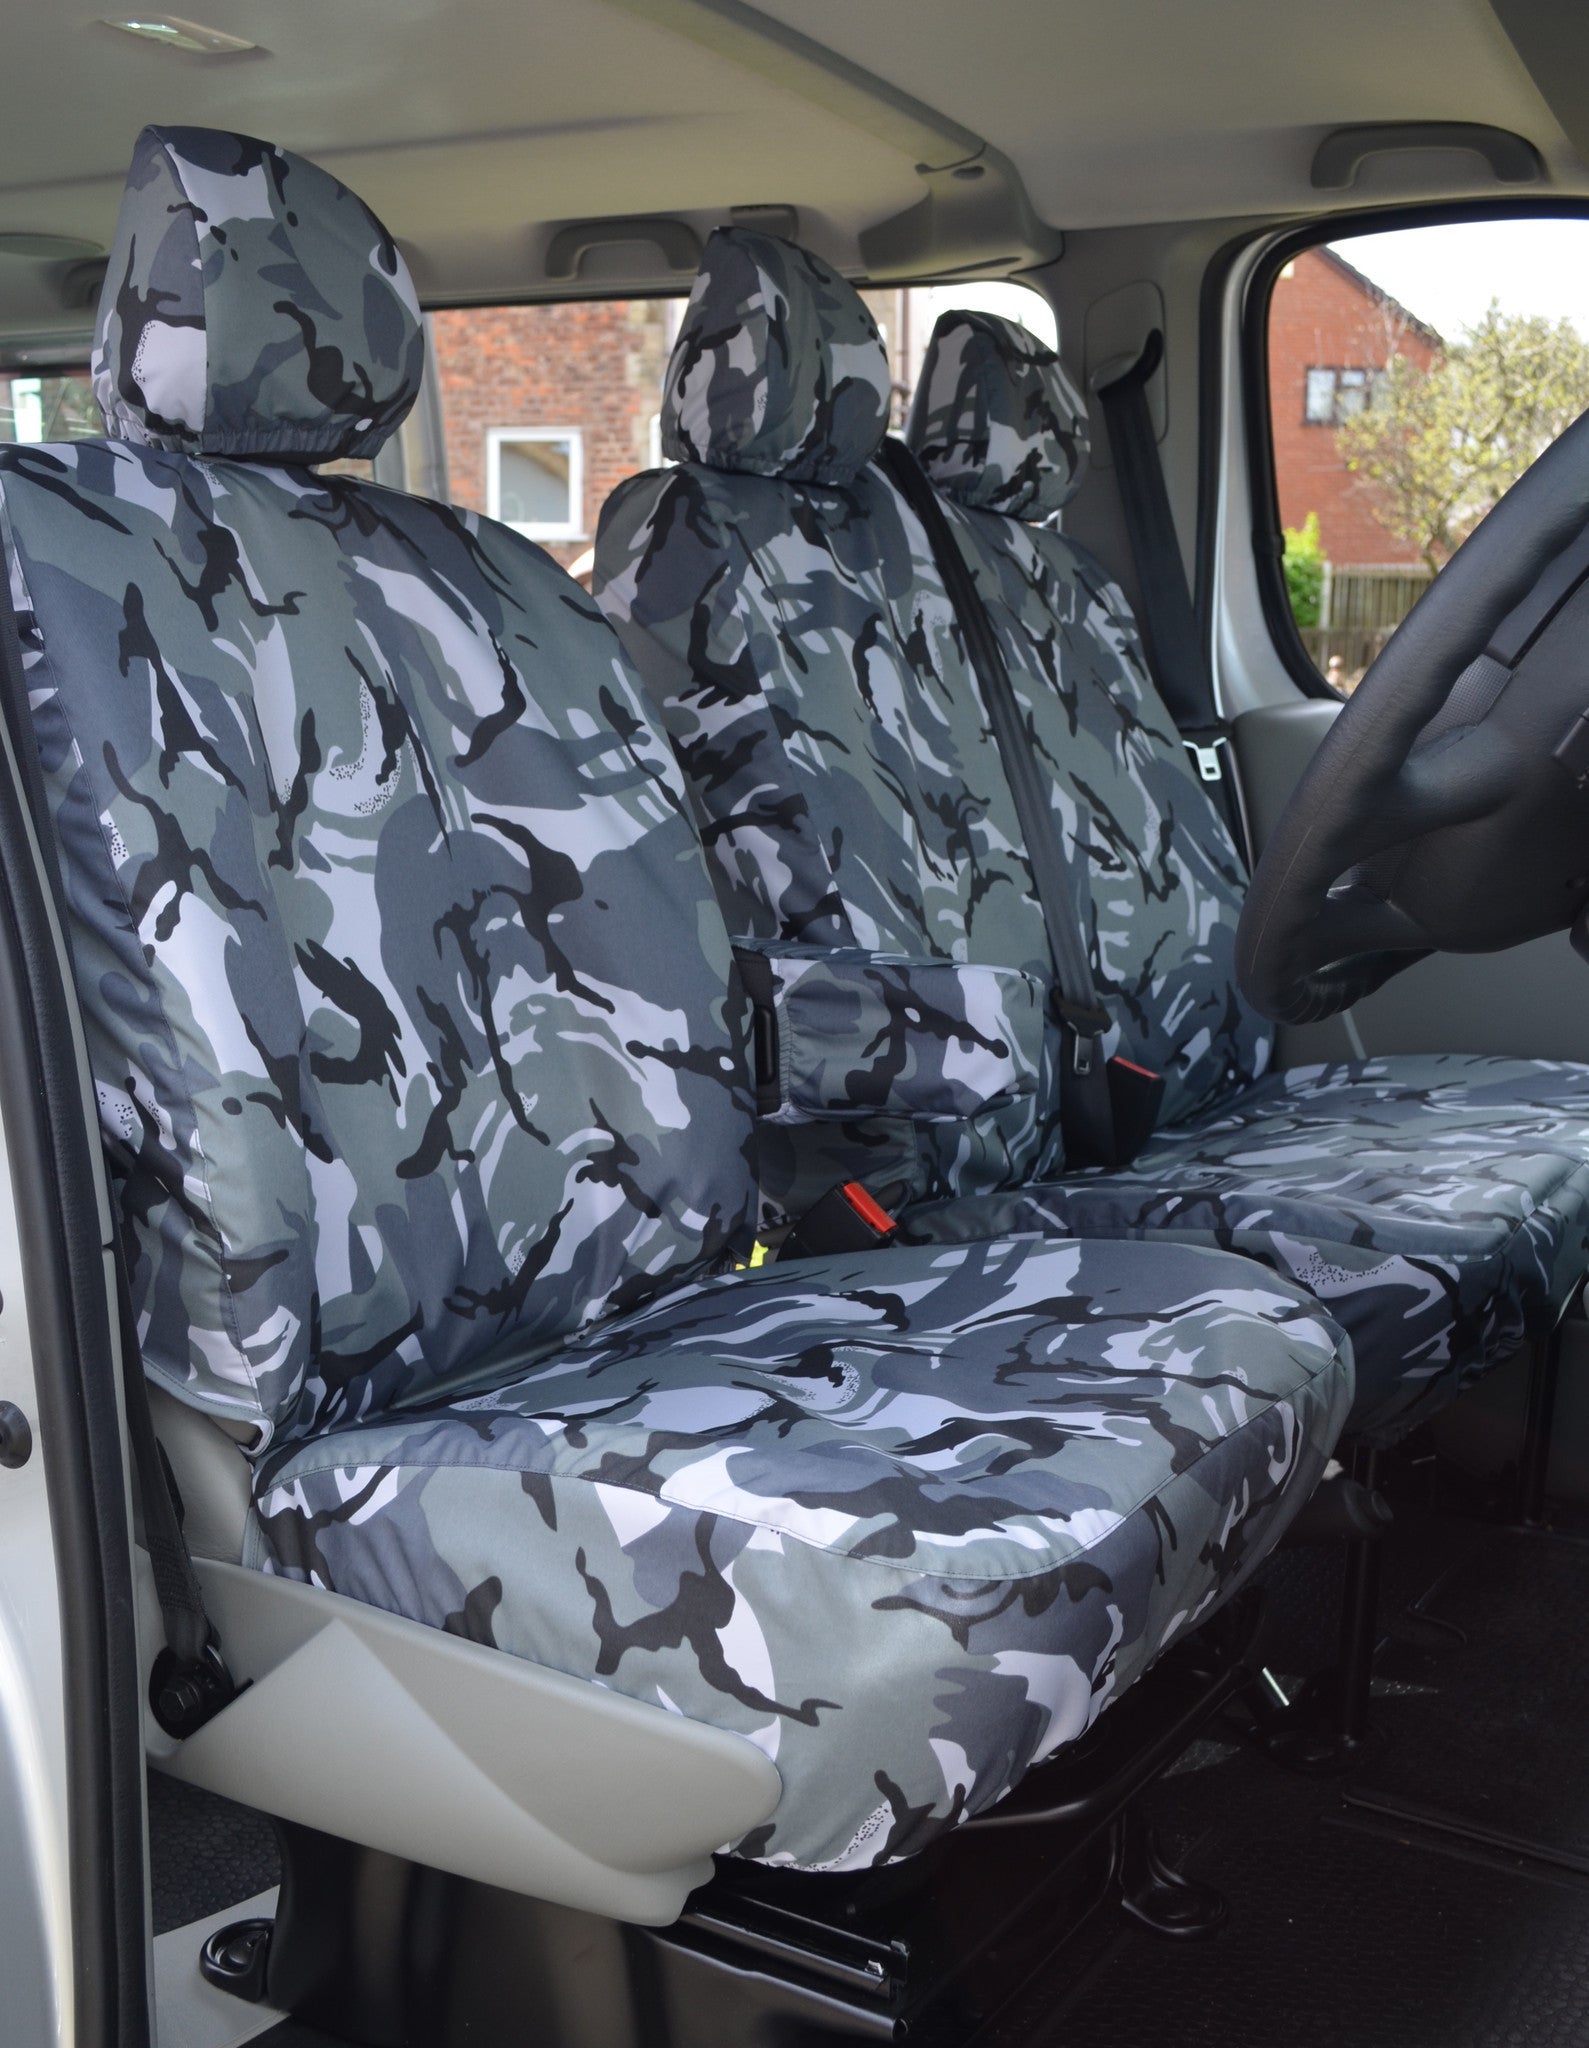 Nissan Primastar 2006 - 2014 Tailored Front Seat Covers Urban Camouflage / With Driver's Armrest Turtle Covers Ltd